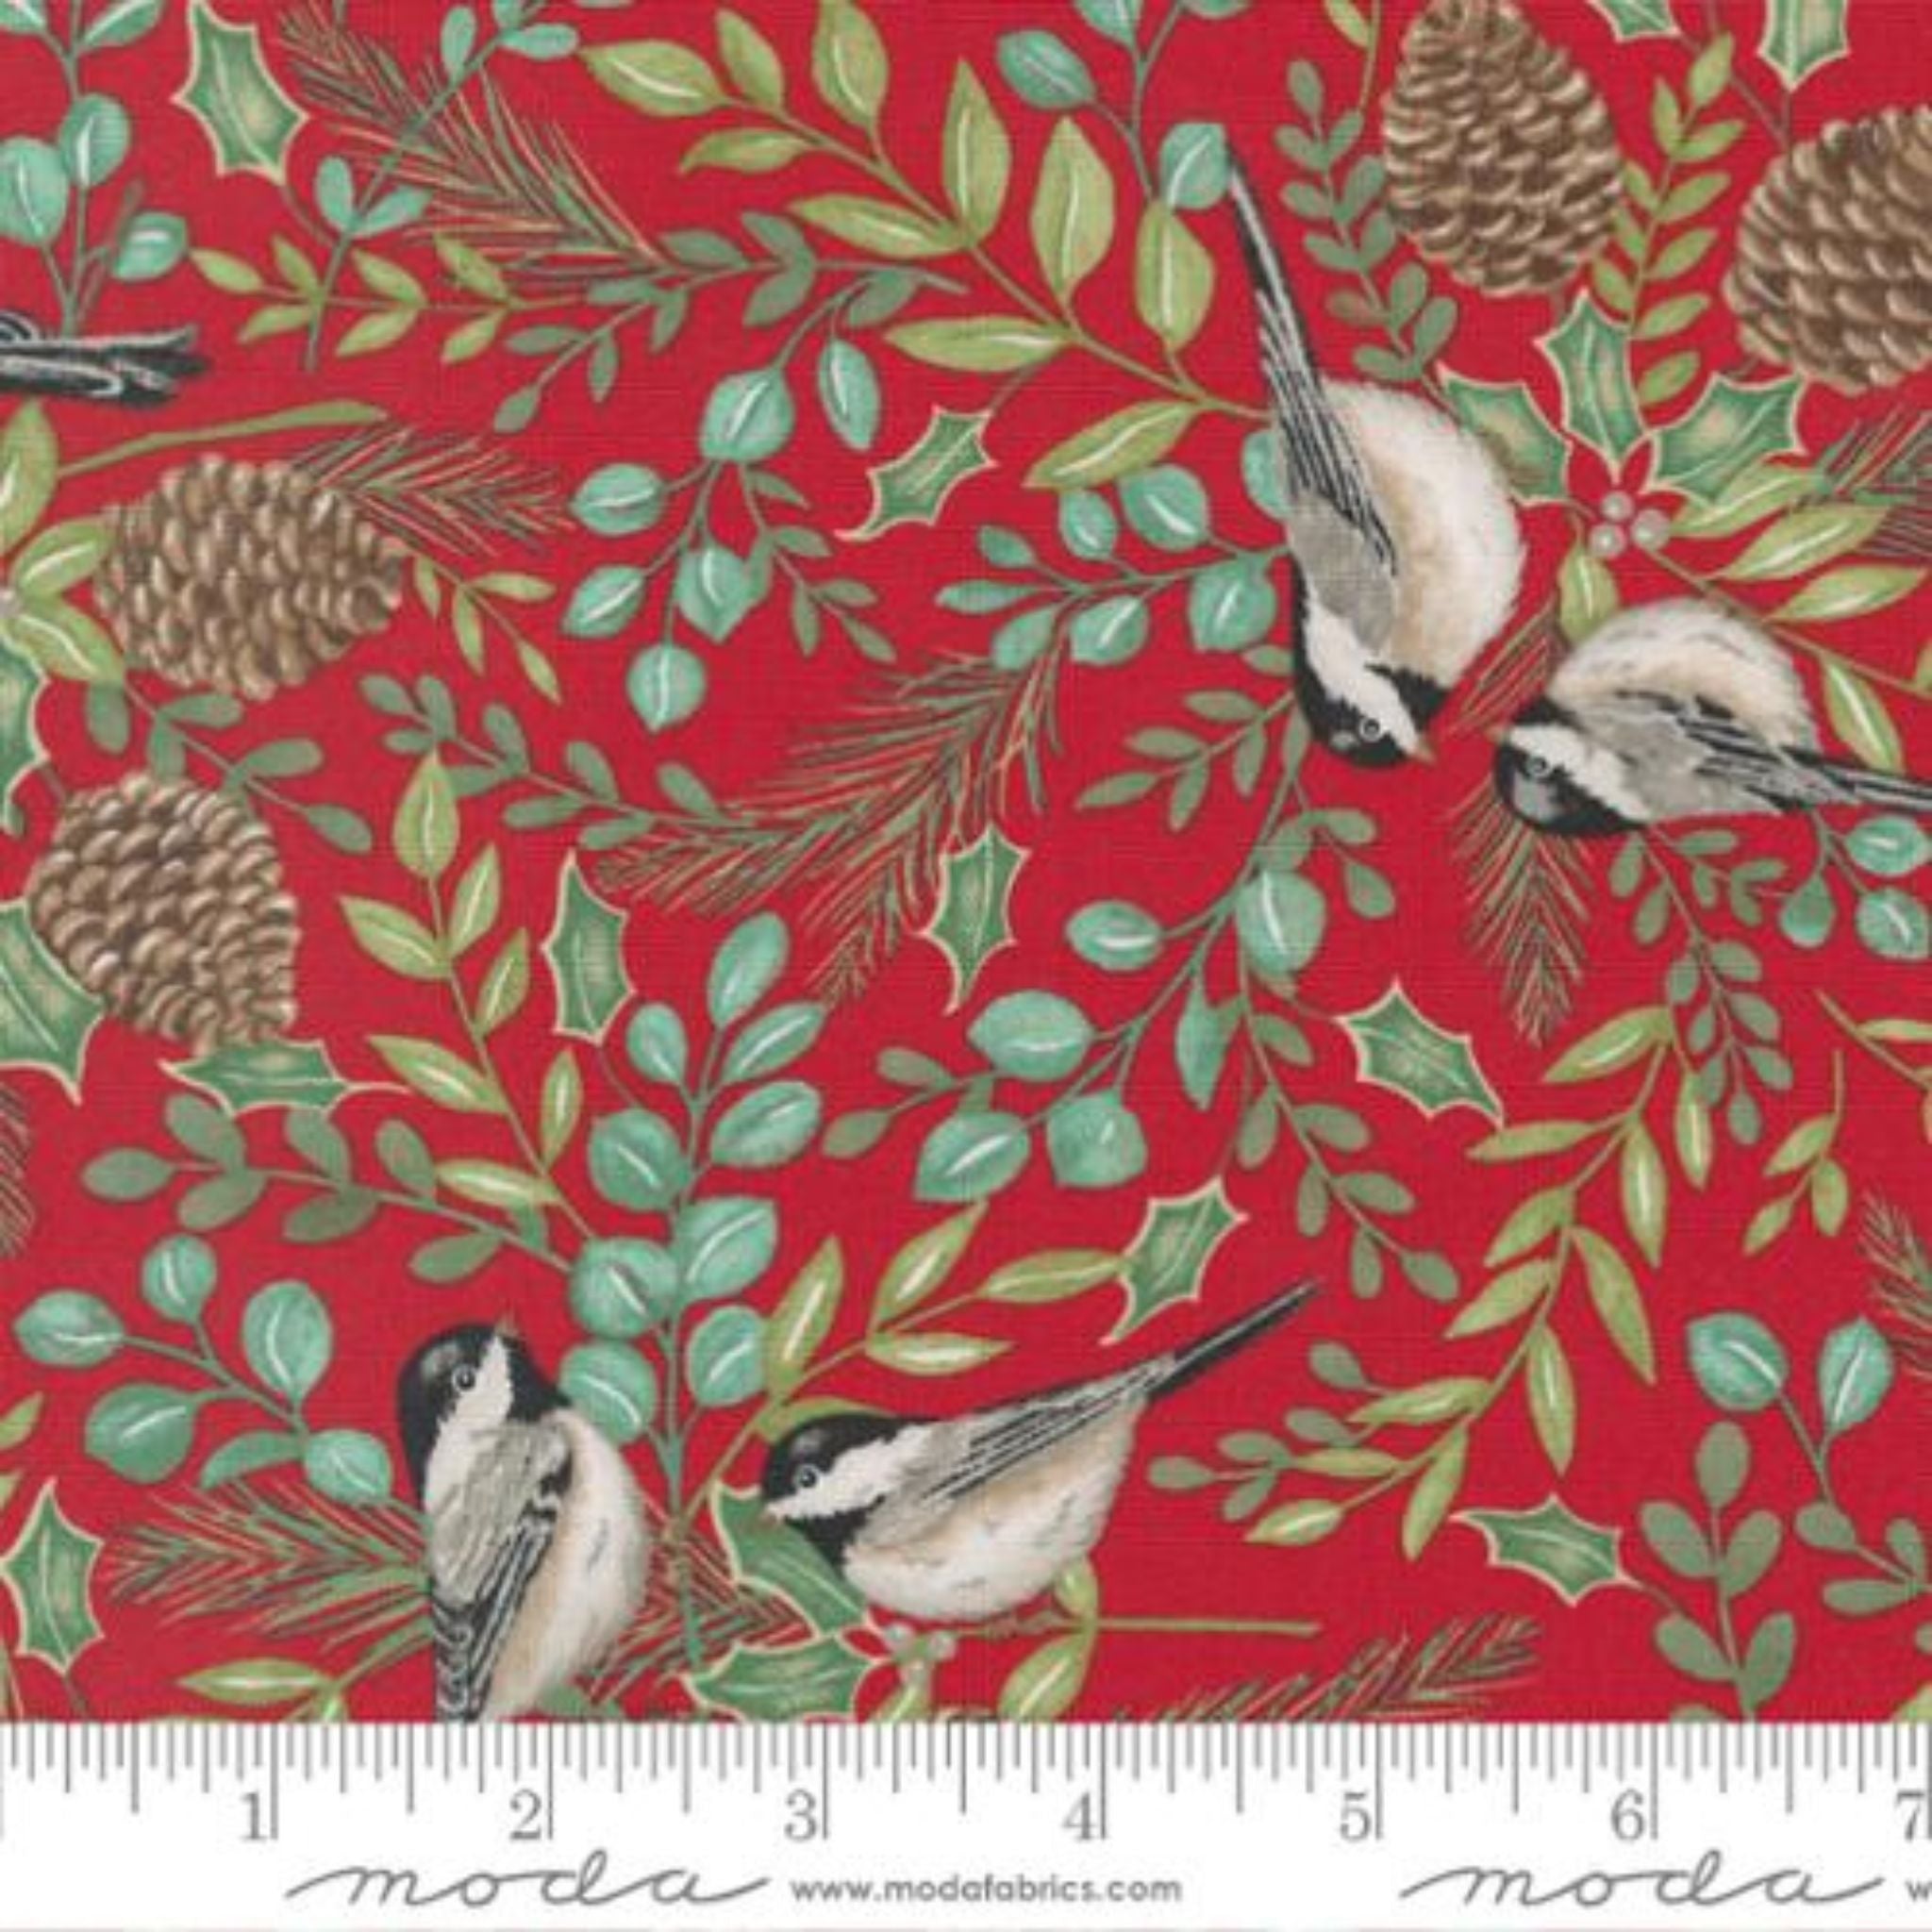 Coaltits on Christmas red cotton fabric - Holidays at Home by Moda